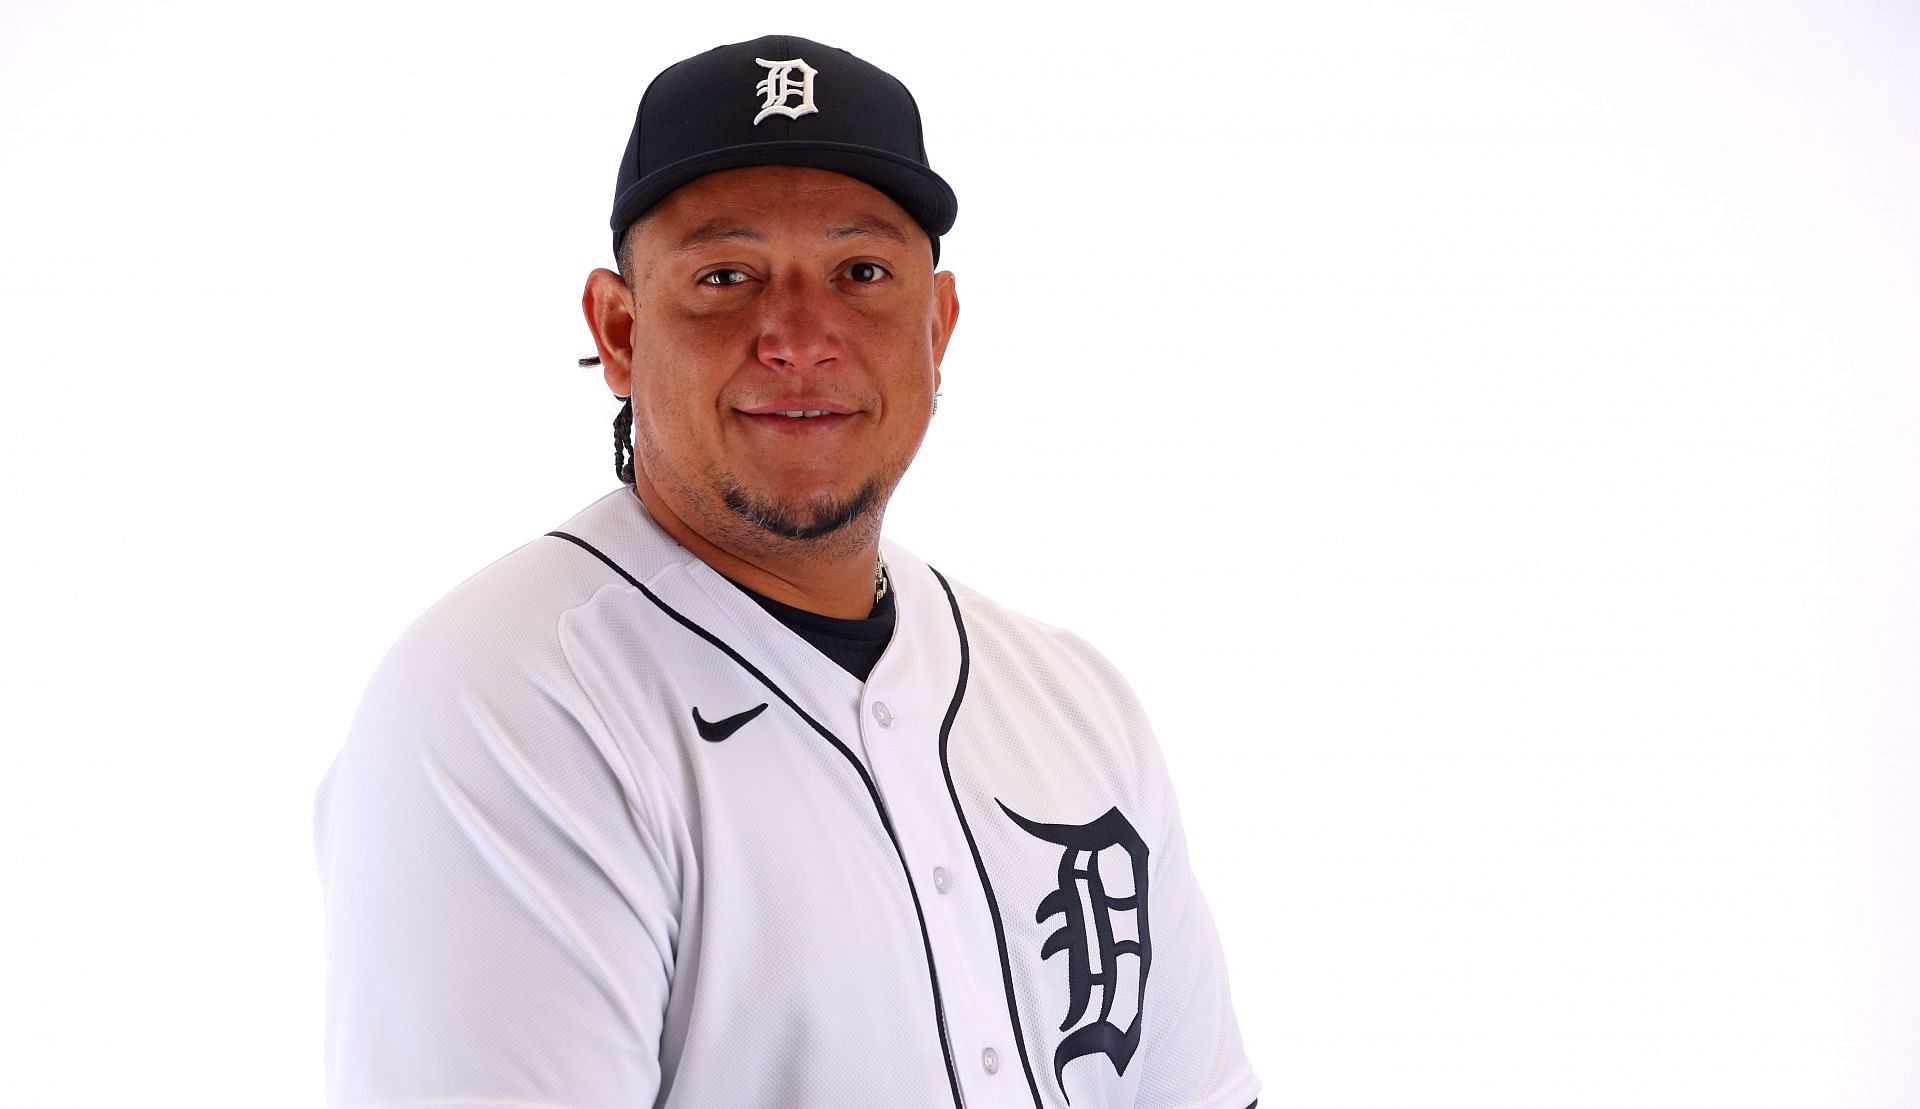 Miguel Cabrera of the Detroit Tigers poses for a portrait during media day